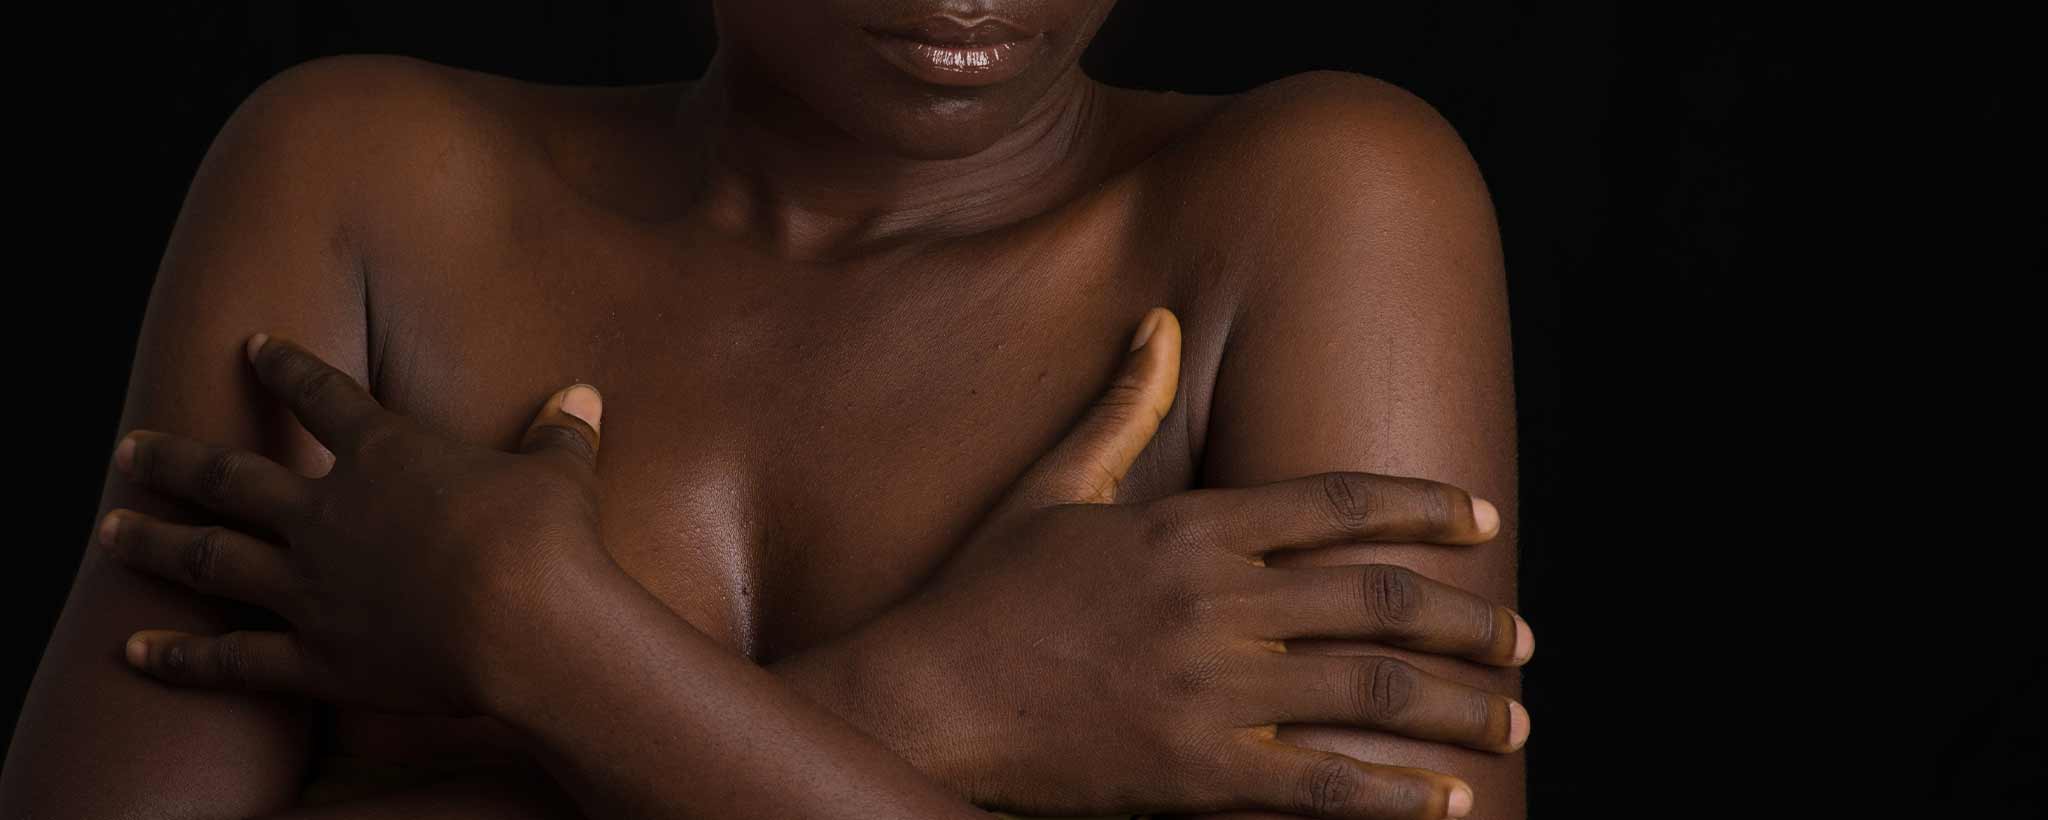 'Protect Children From Breast Ironing'